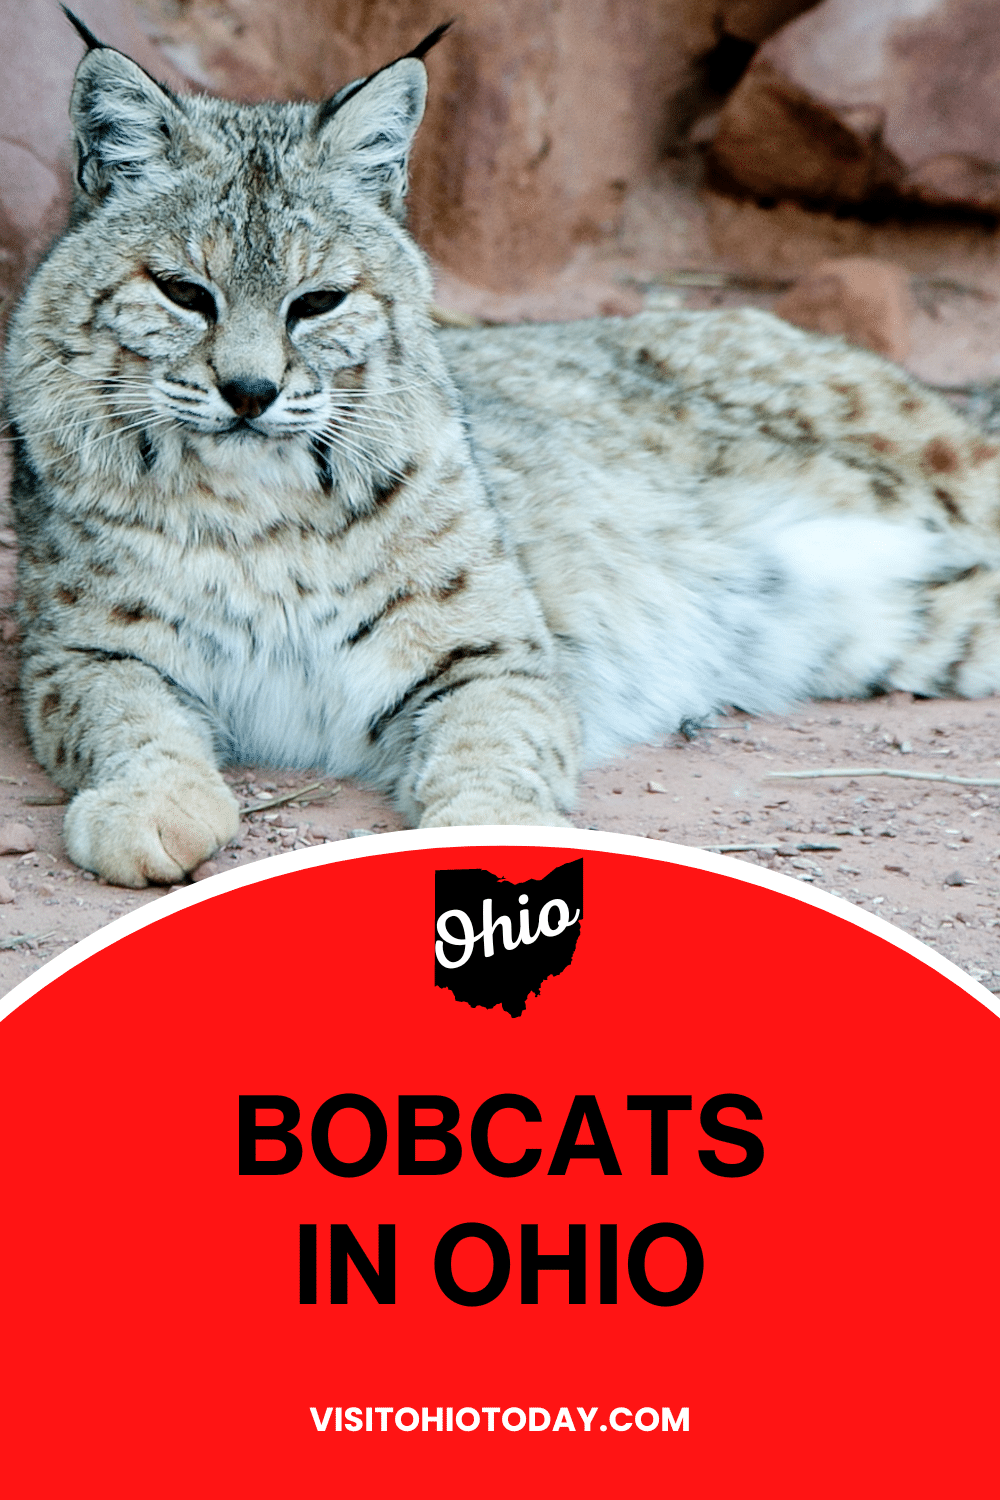 The Bobcat (Lynx rufus) is native to North America, although it ranges from southern Canada through most US states and into Mexico. Bobcats in Ohio were once non-existent, but now have healthy, rising numbers.